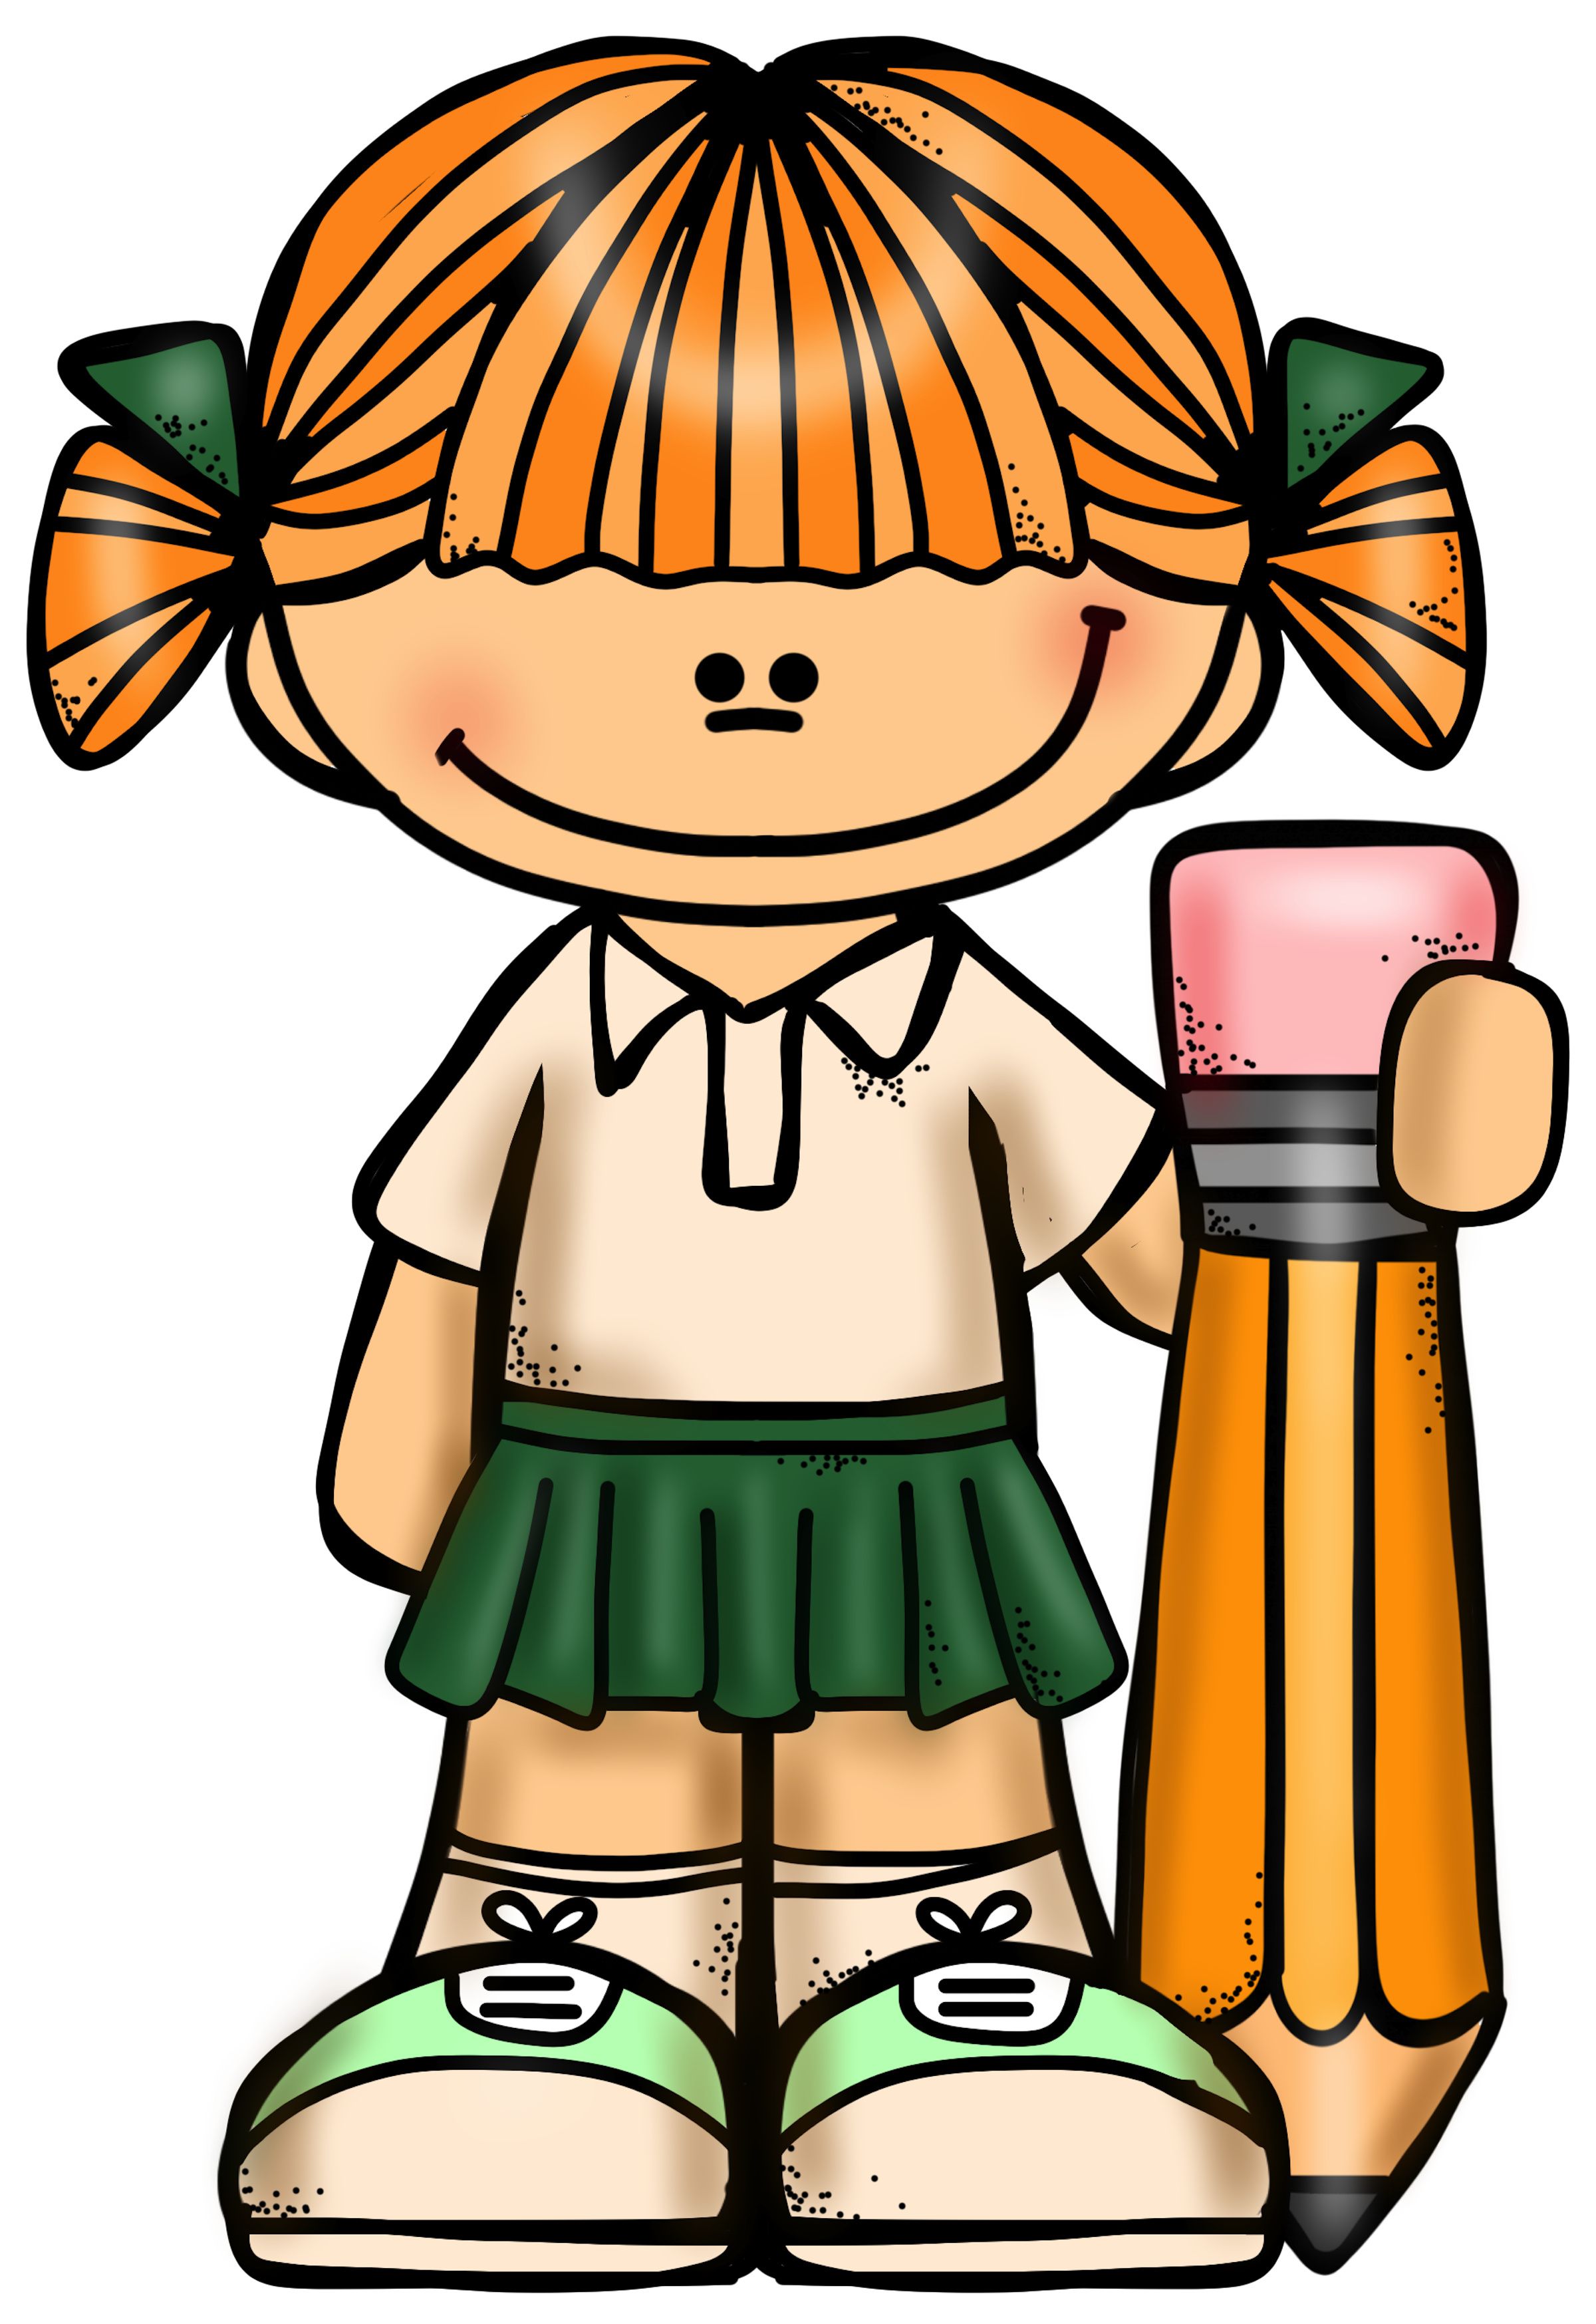 Pencils clipart student. I like writing with